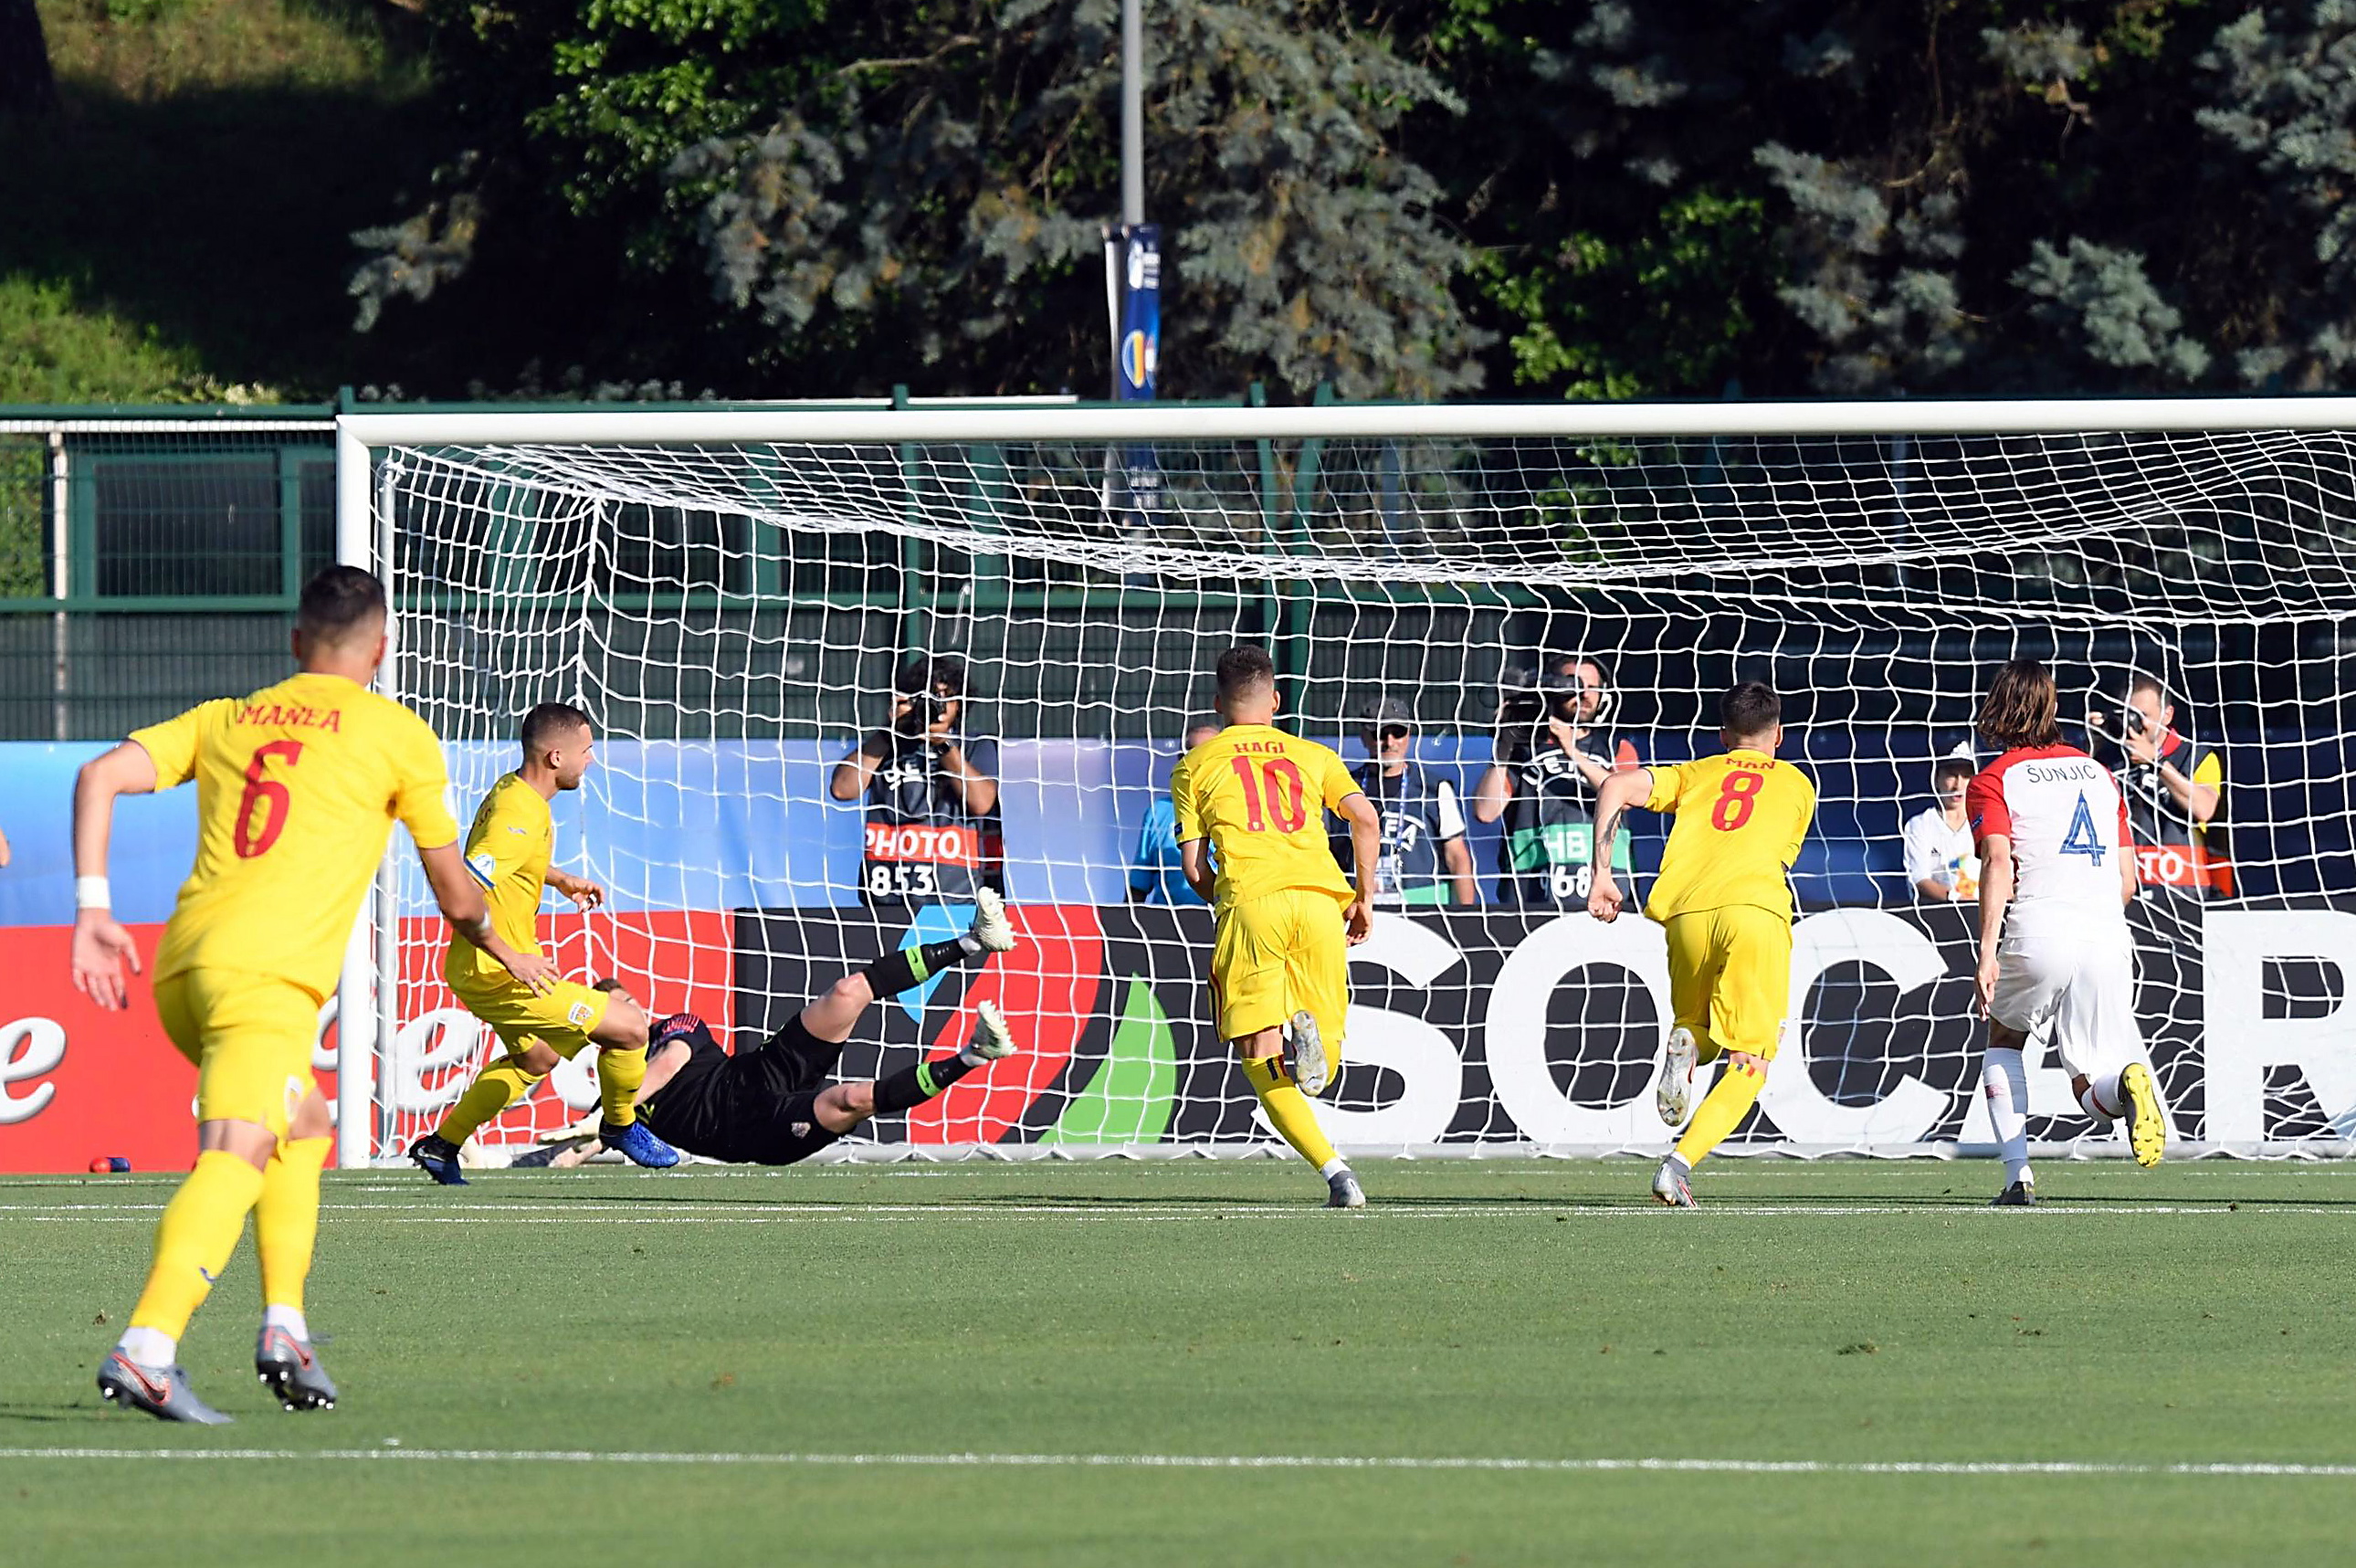 epa07656408 Romania's George Puscas (2-L) scores on penalty during the UEFA European Under-21 Championship 2019 Group C soccer match between Romania and Croatia in San Marino, 18 June 2019.  EPA/LUCA FANFANI